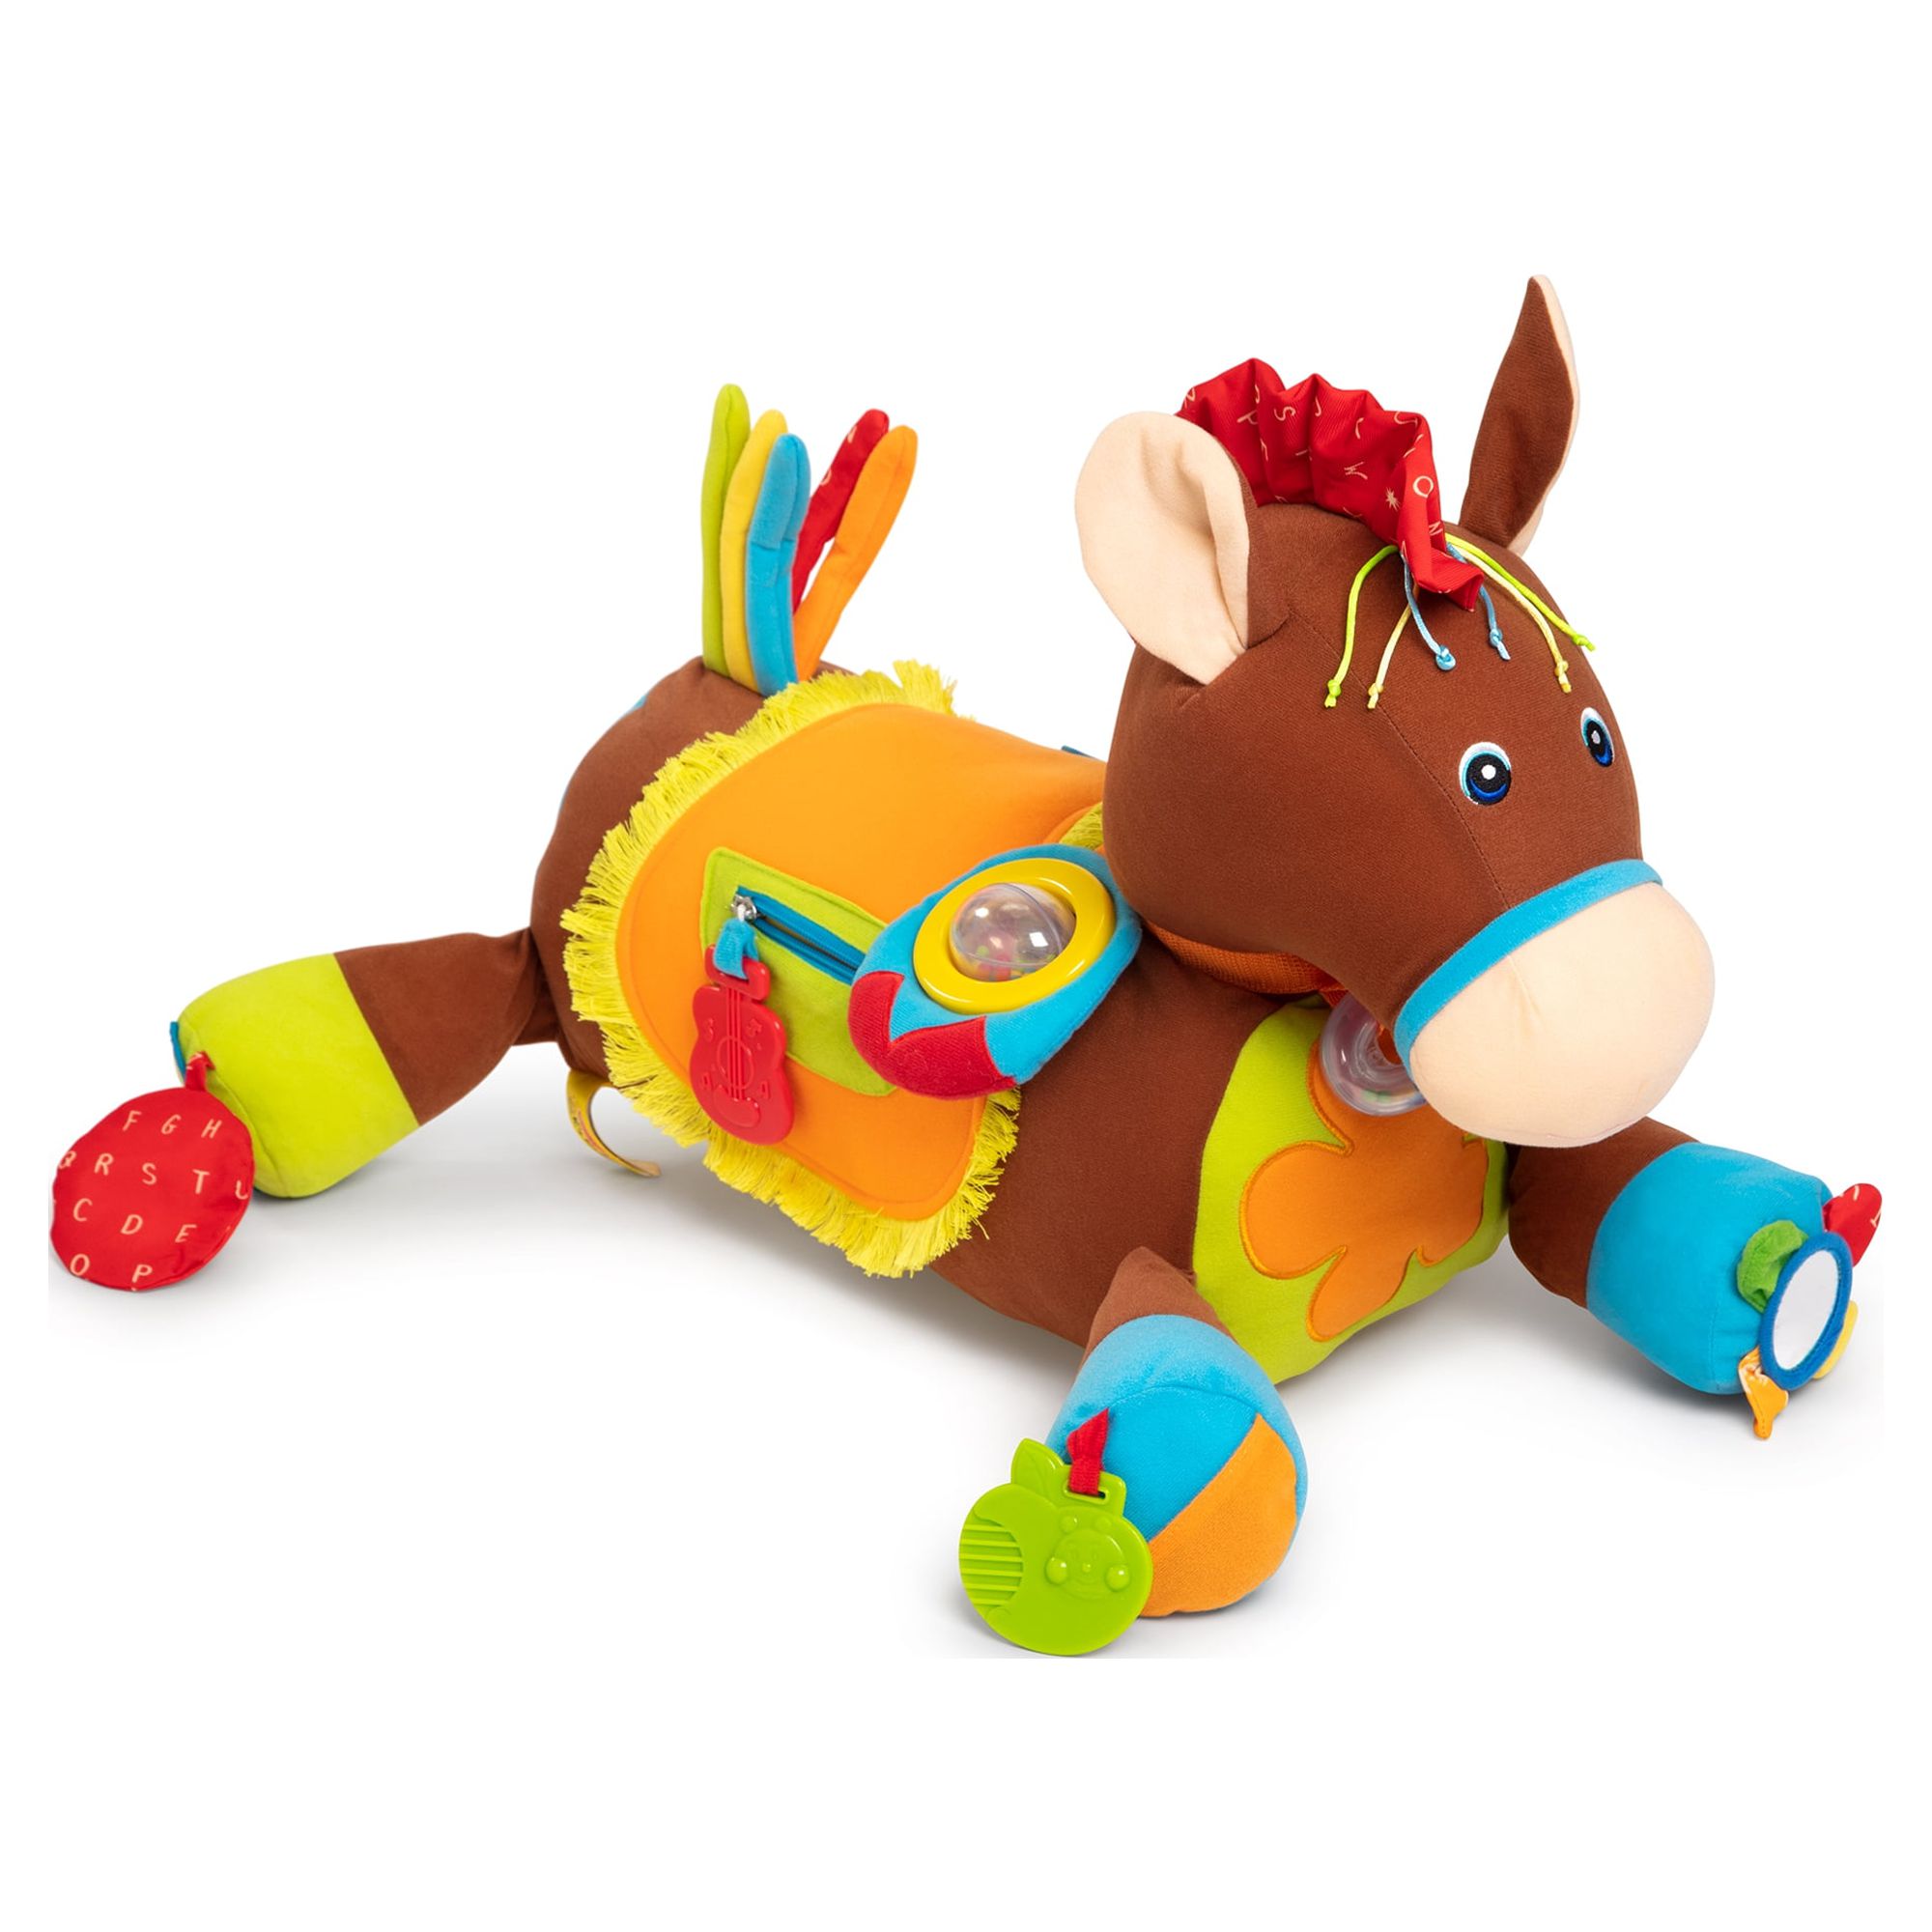 Melissa & Doug Giddy-Up and Play Baby Activity Toy - Multi-Sensory Horse - image 1 of 10